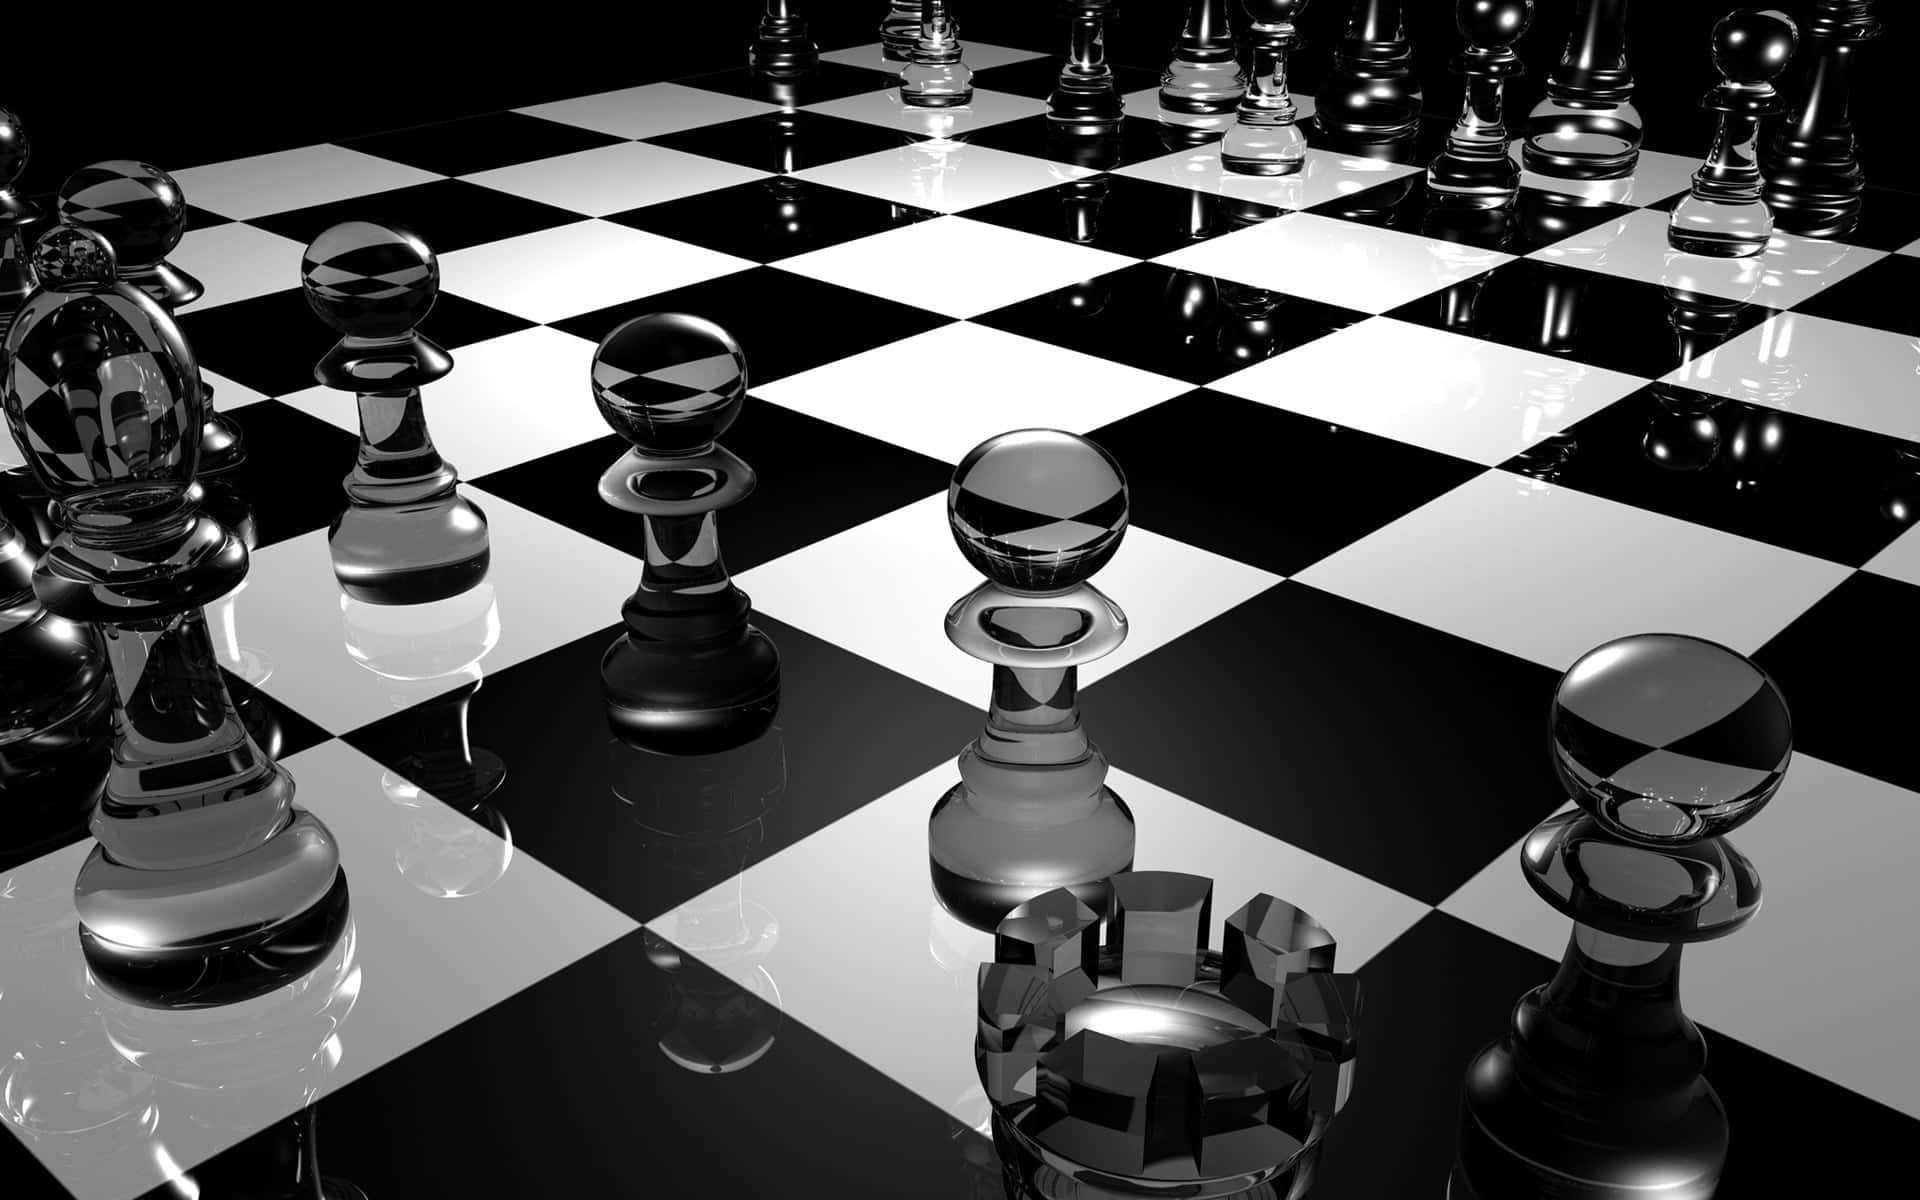 Intense Battle of Minds on a Black and White Chess Board Wallpaper